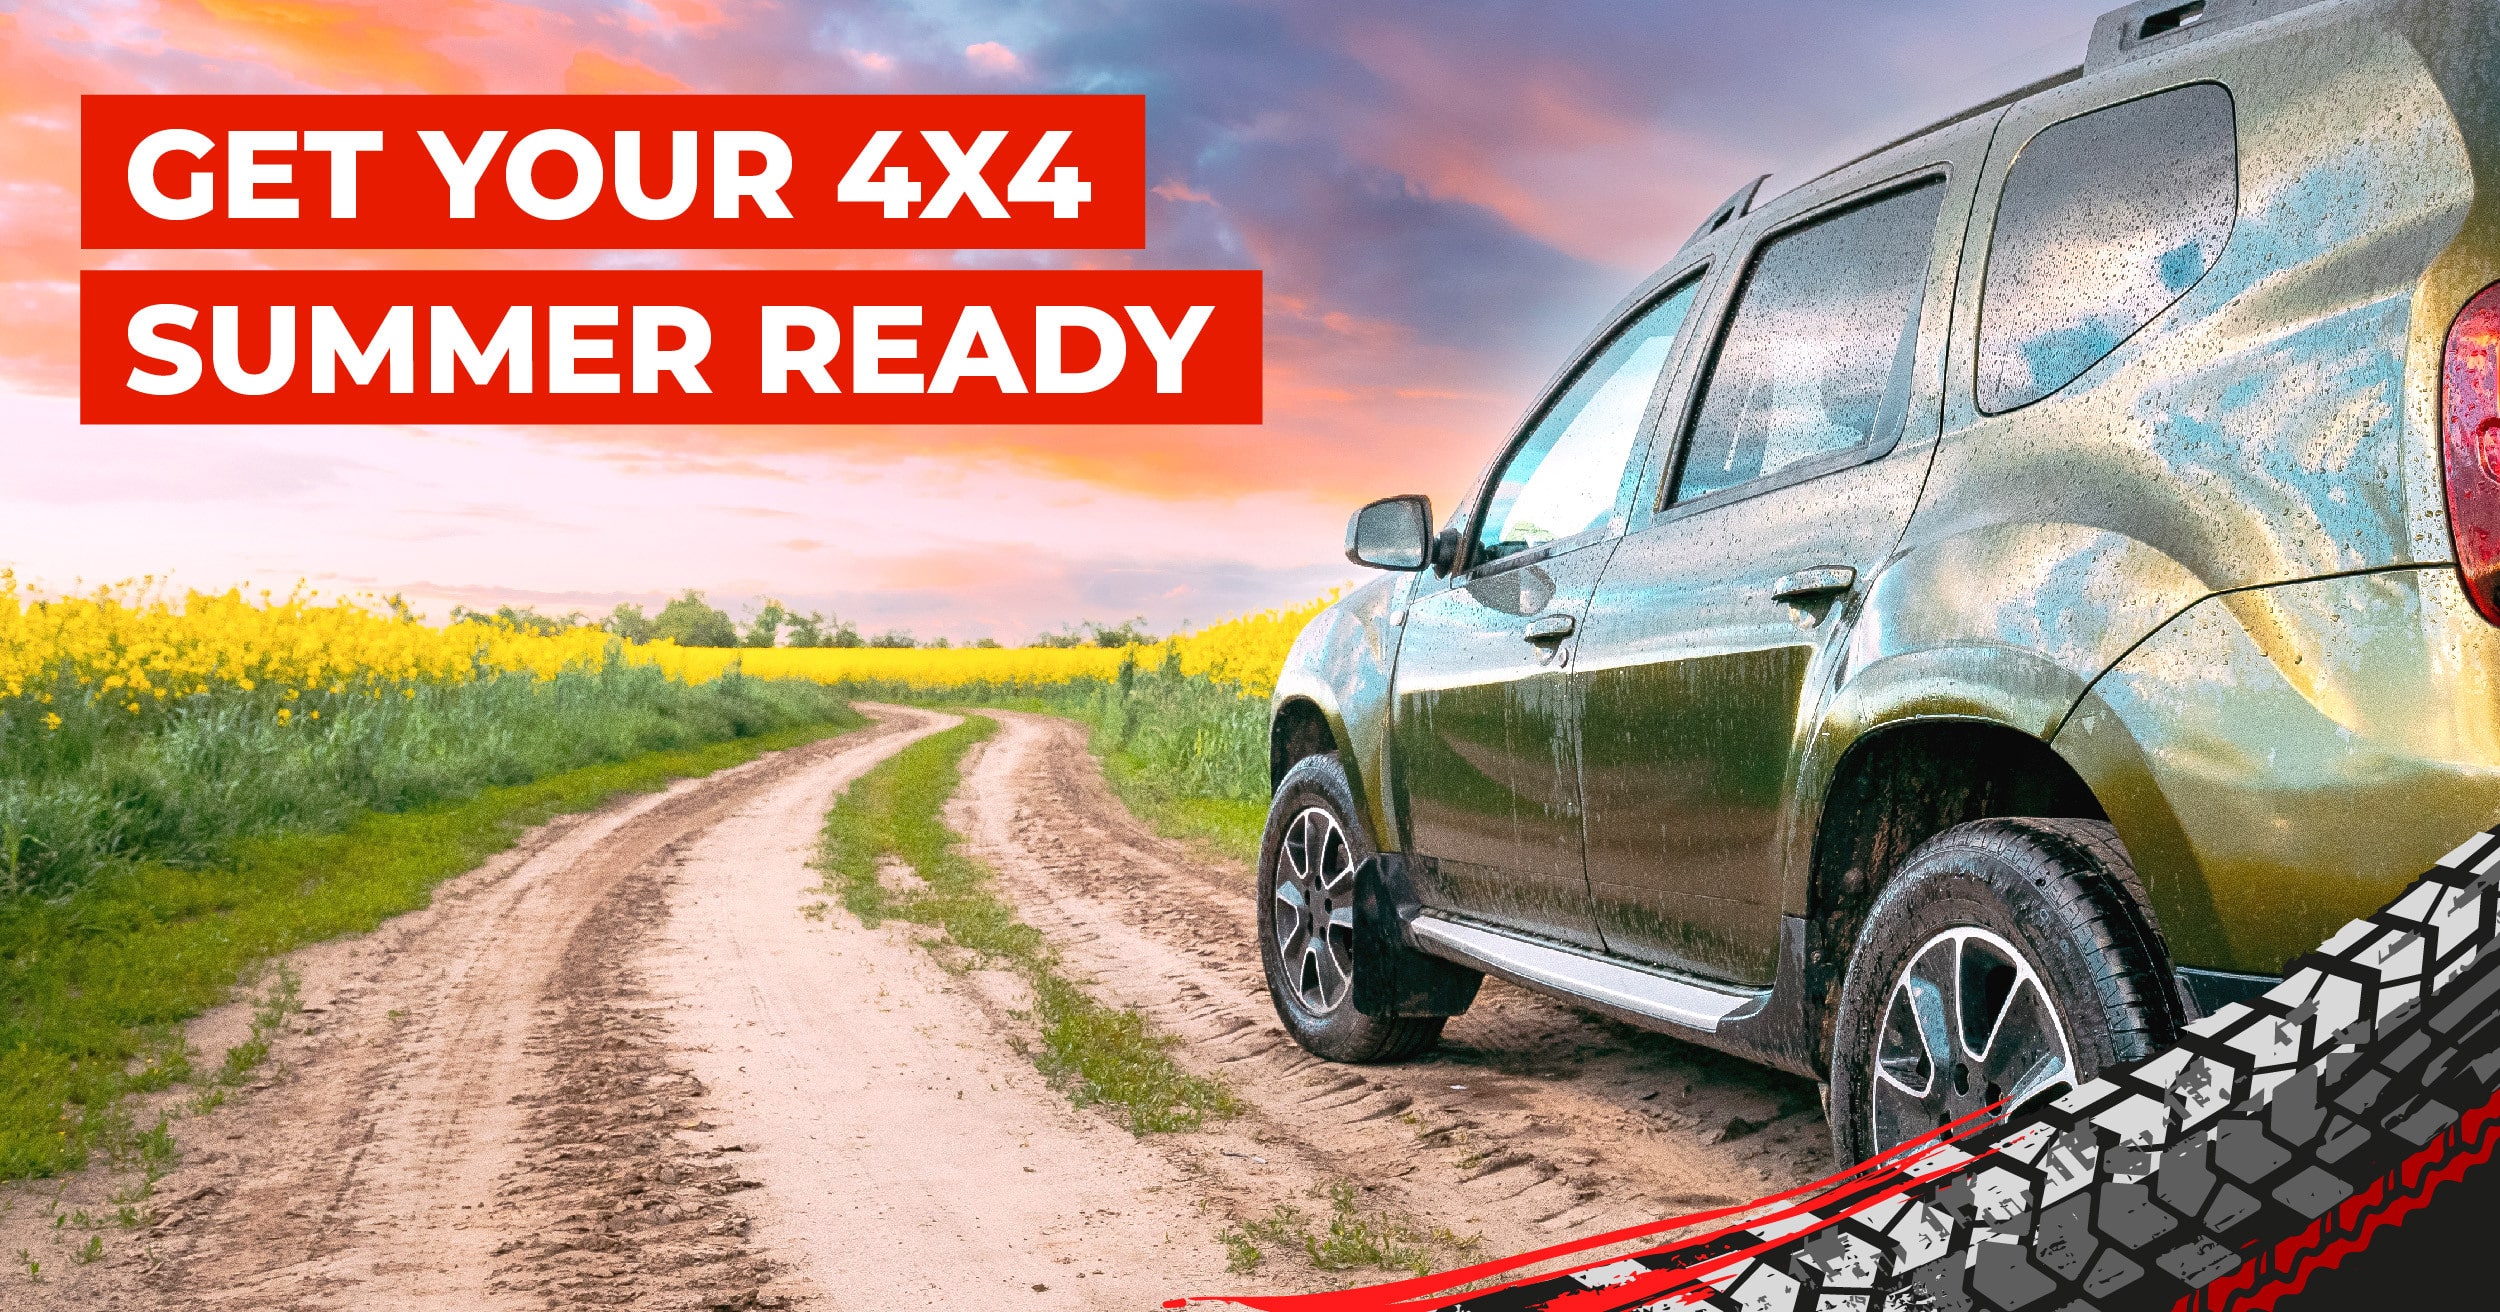 Get Your 4x4 Summer Ready With Our Essential Tips